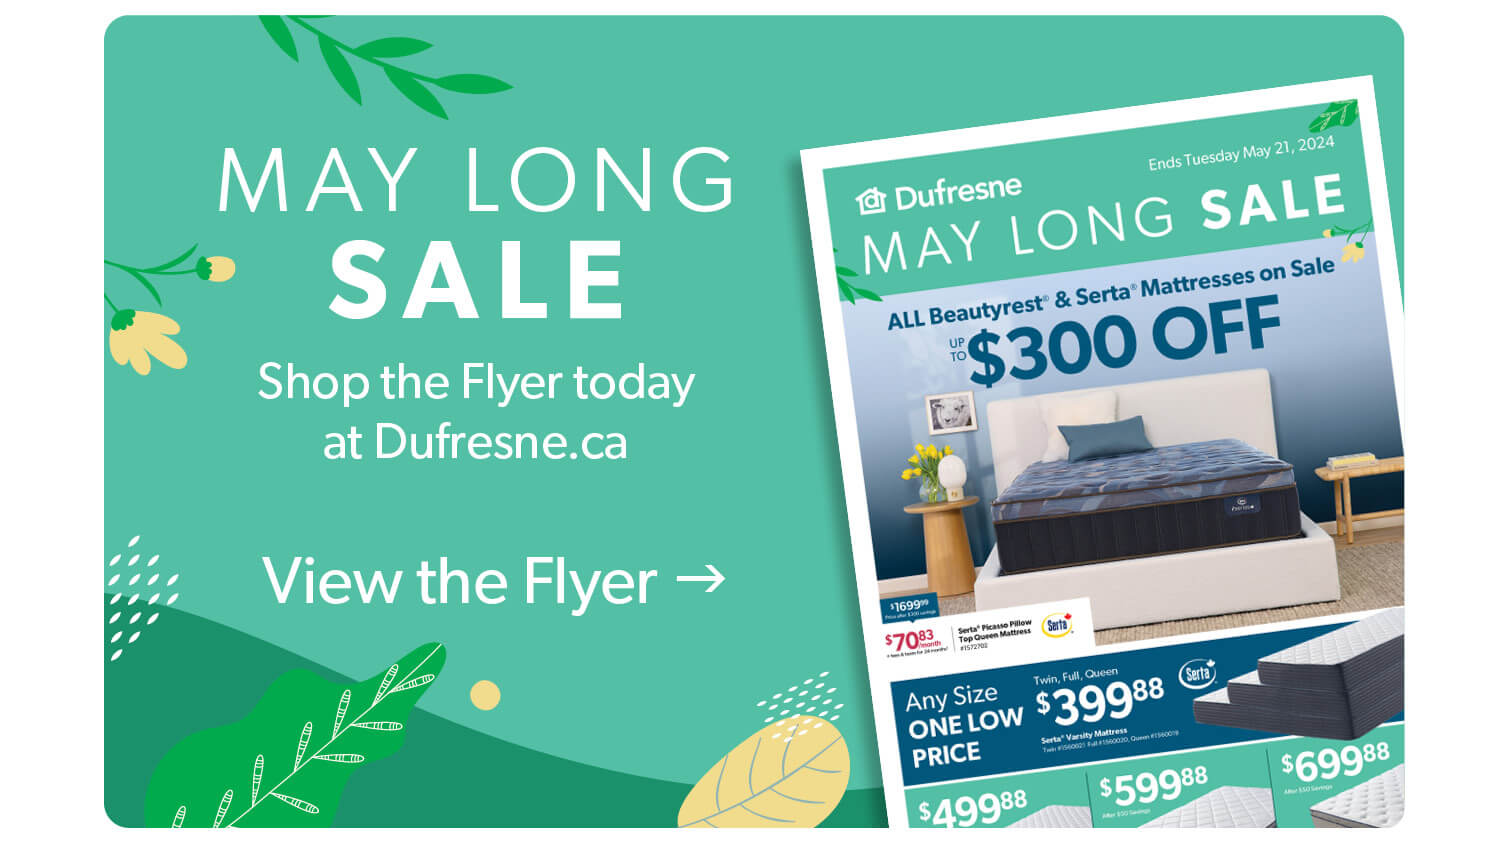 May Long Sale. Shop the Flyer today at Dufresne.ca. Click to view the flyer.